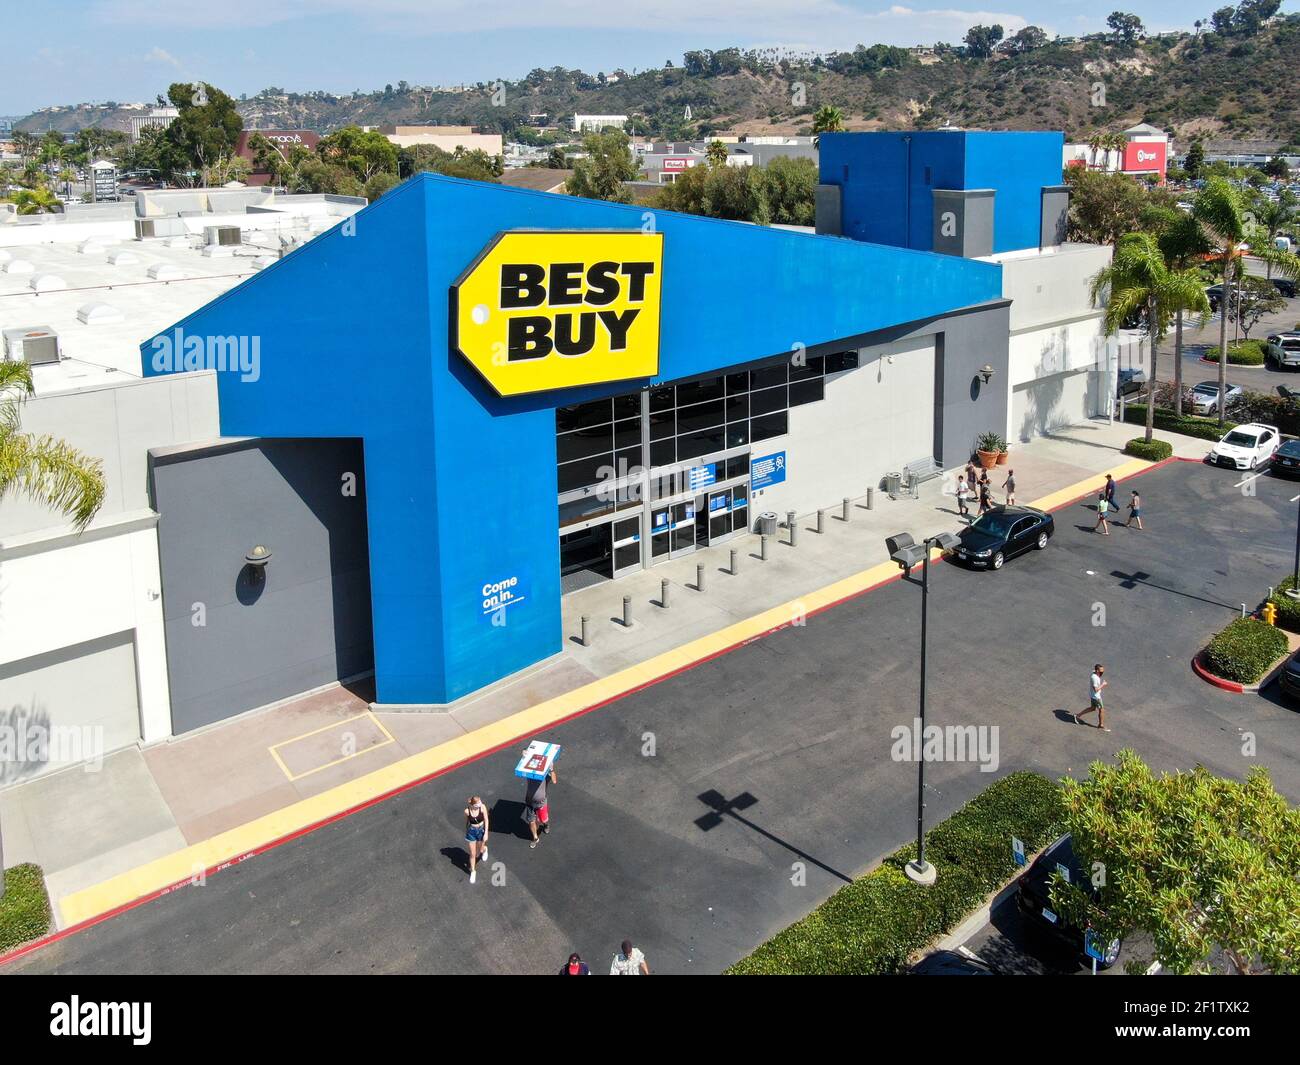 Aerial view of Best Buy multinational electronics store. Stock Photo